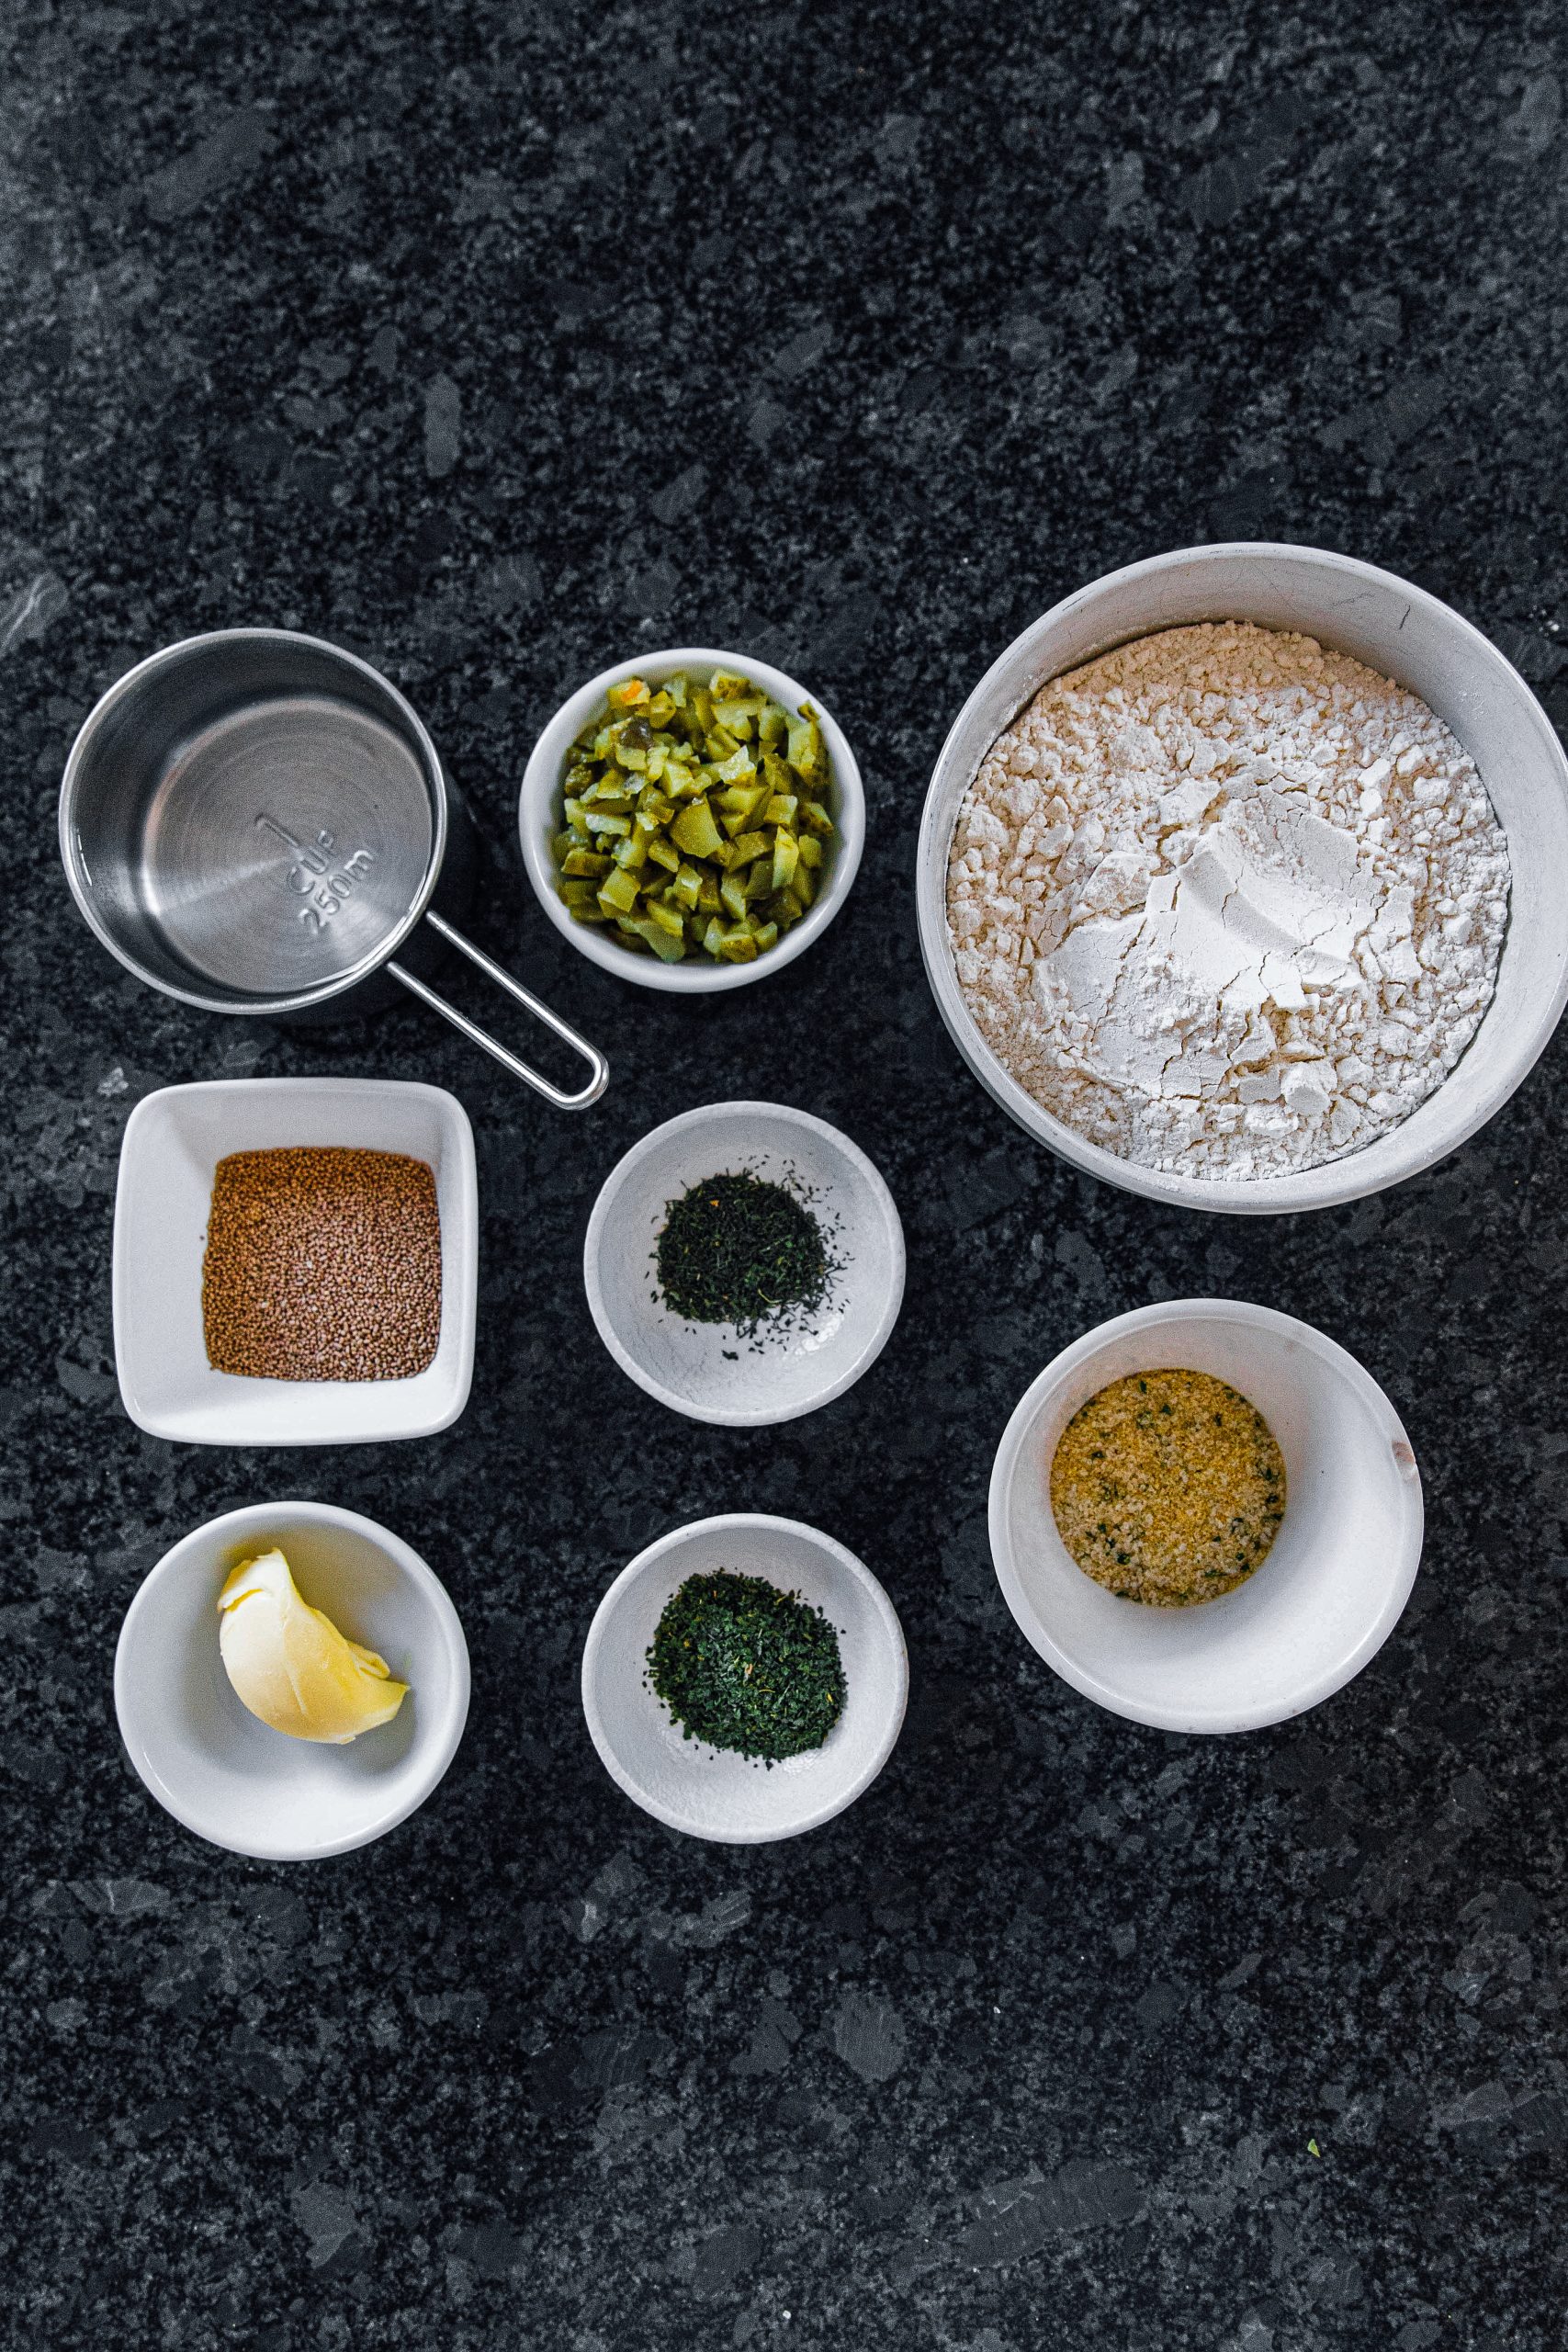 Dill Pickle Bread Ingredients